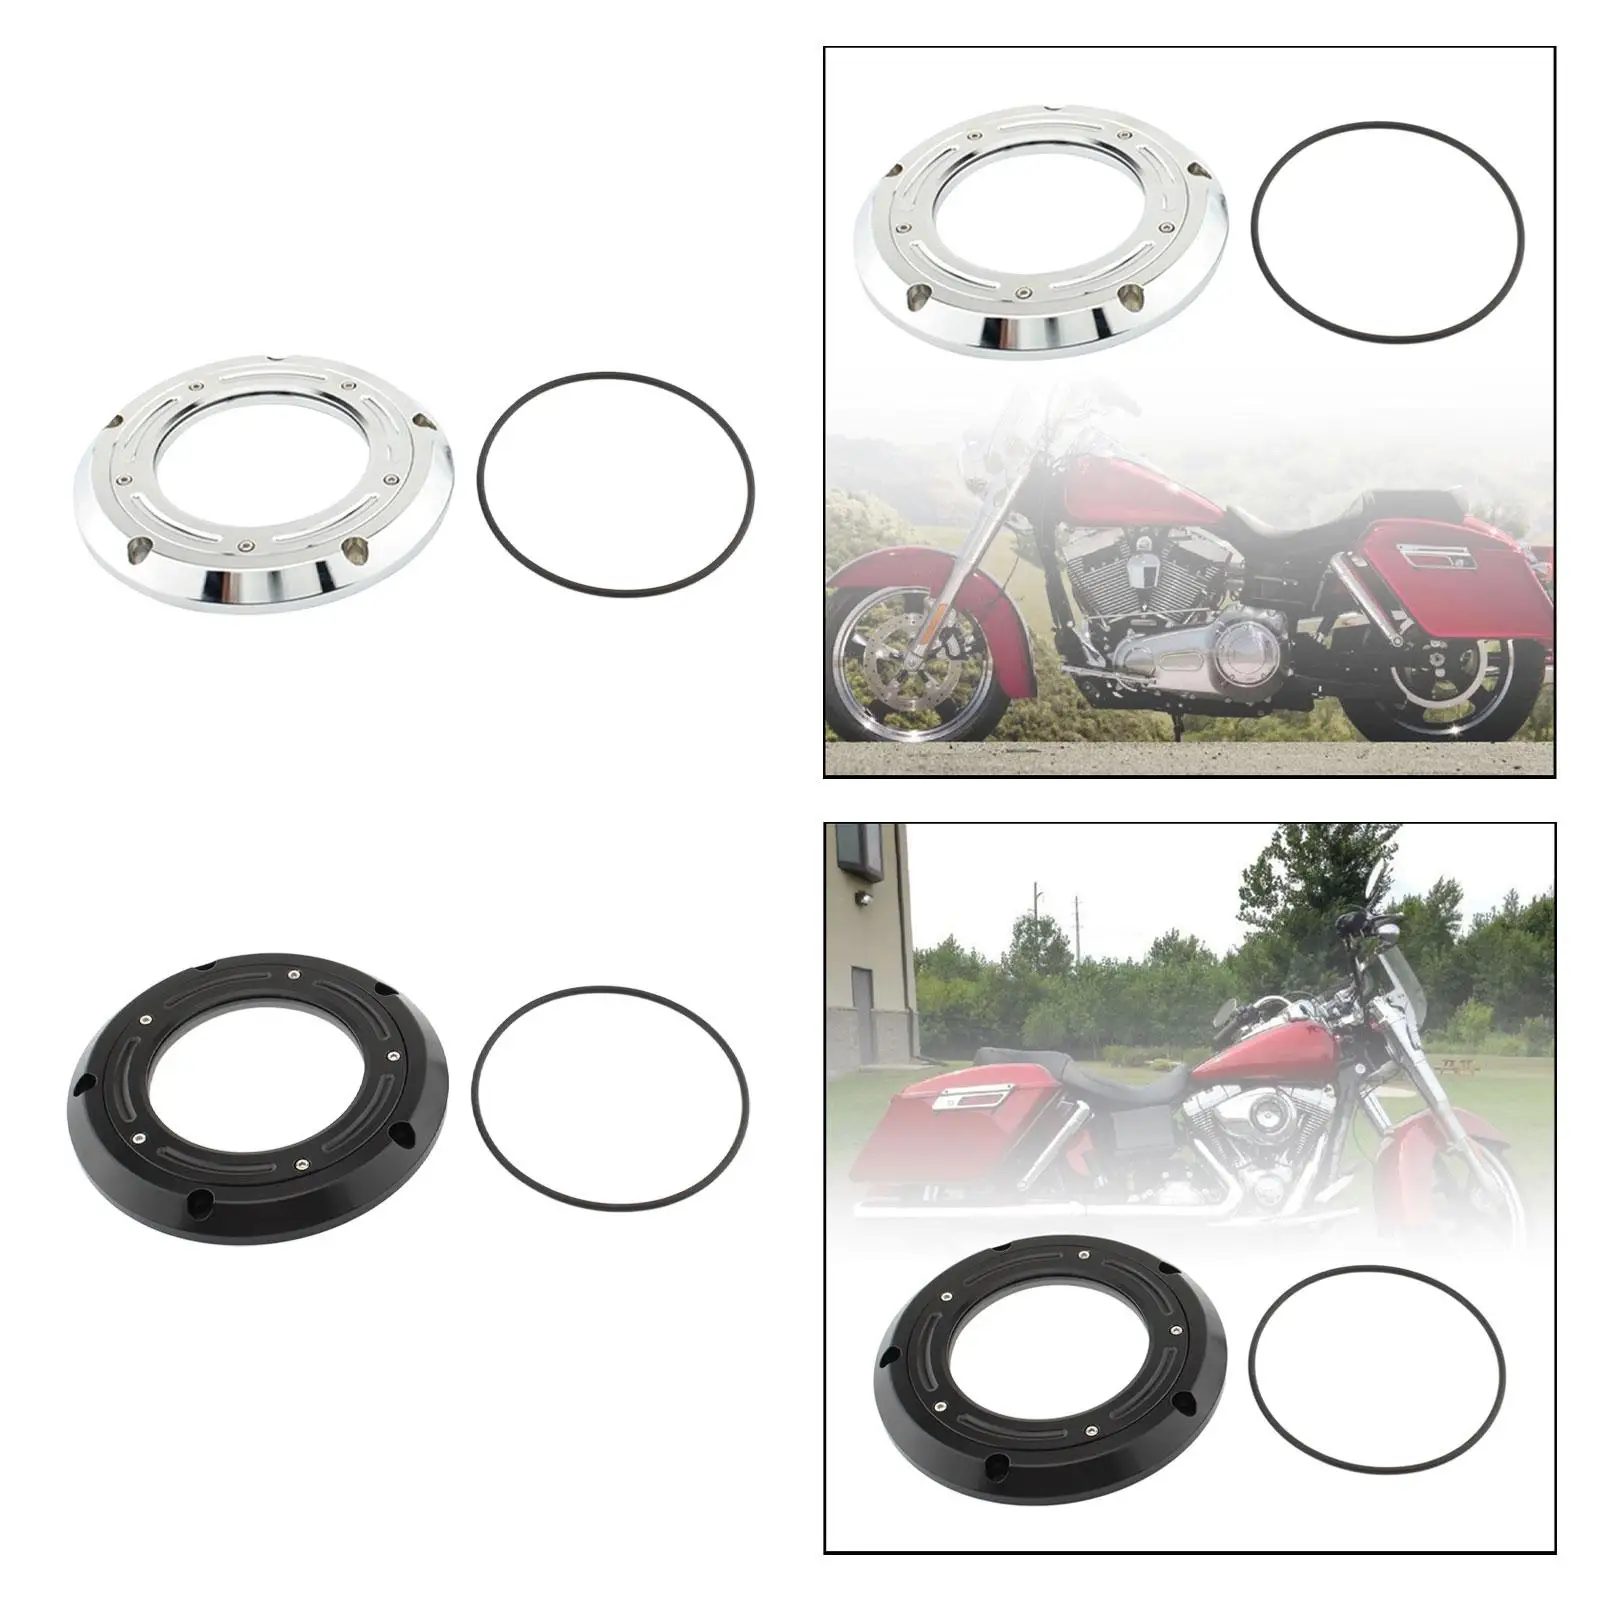 Motorcycle Clutch Derby Cover Parts for-Flhr